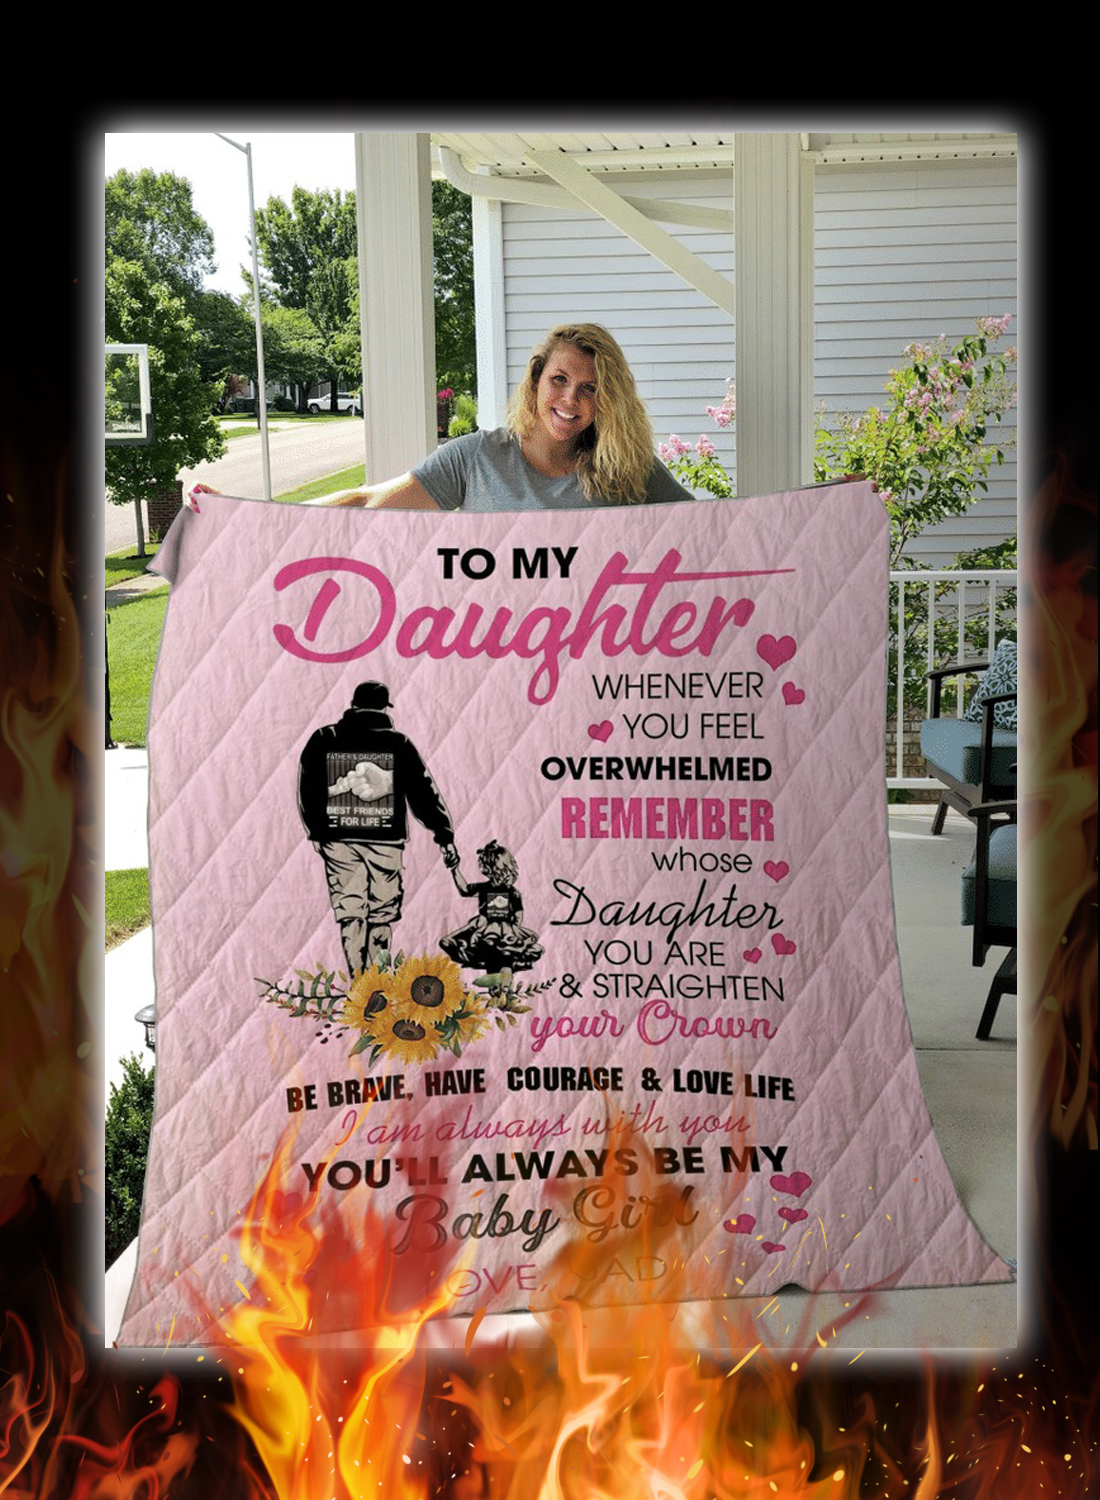 To my daughter baby girl love dad quilt